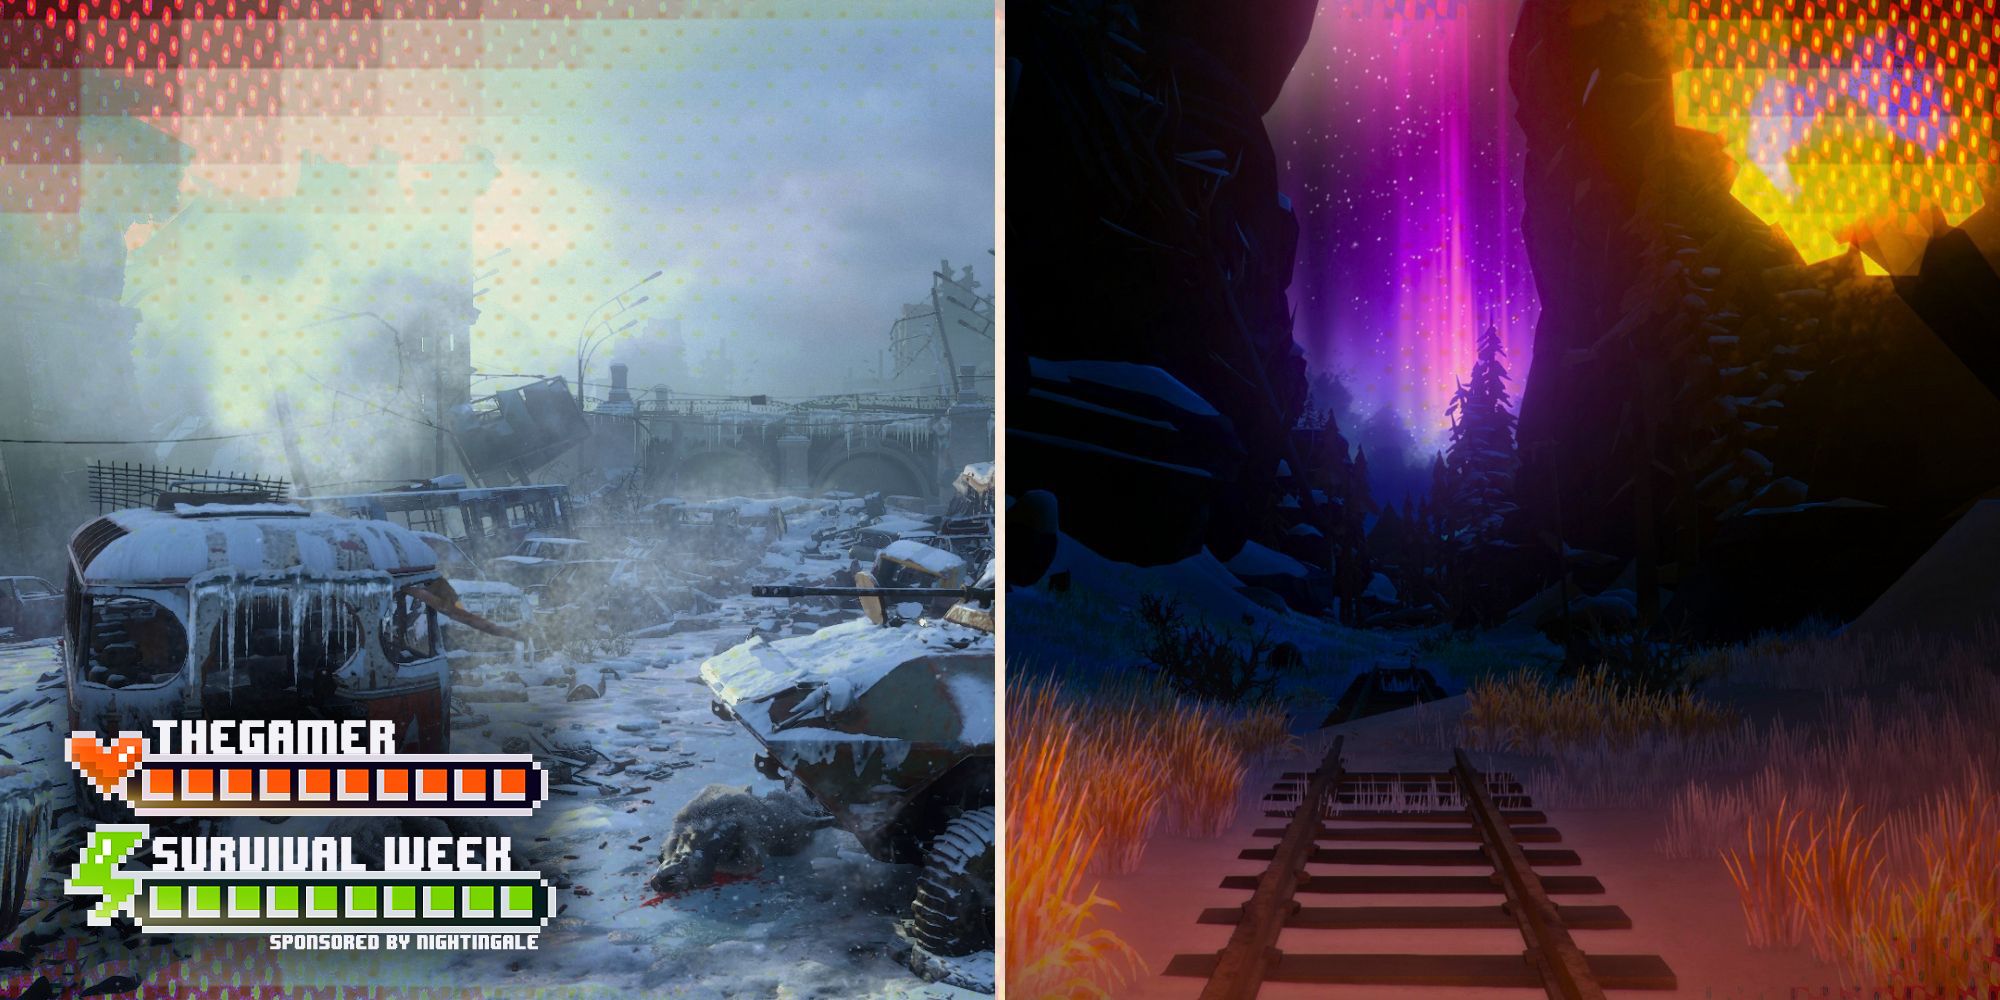 A spllit image of a railroad lit by torch light with purple lights in the sky, and a snowy, postapocalyptic scene showing run-down military and civilian vehicles.